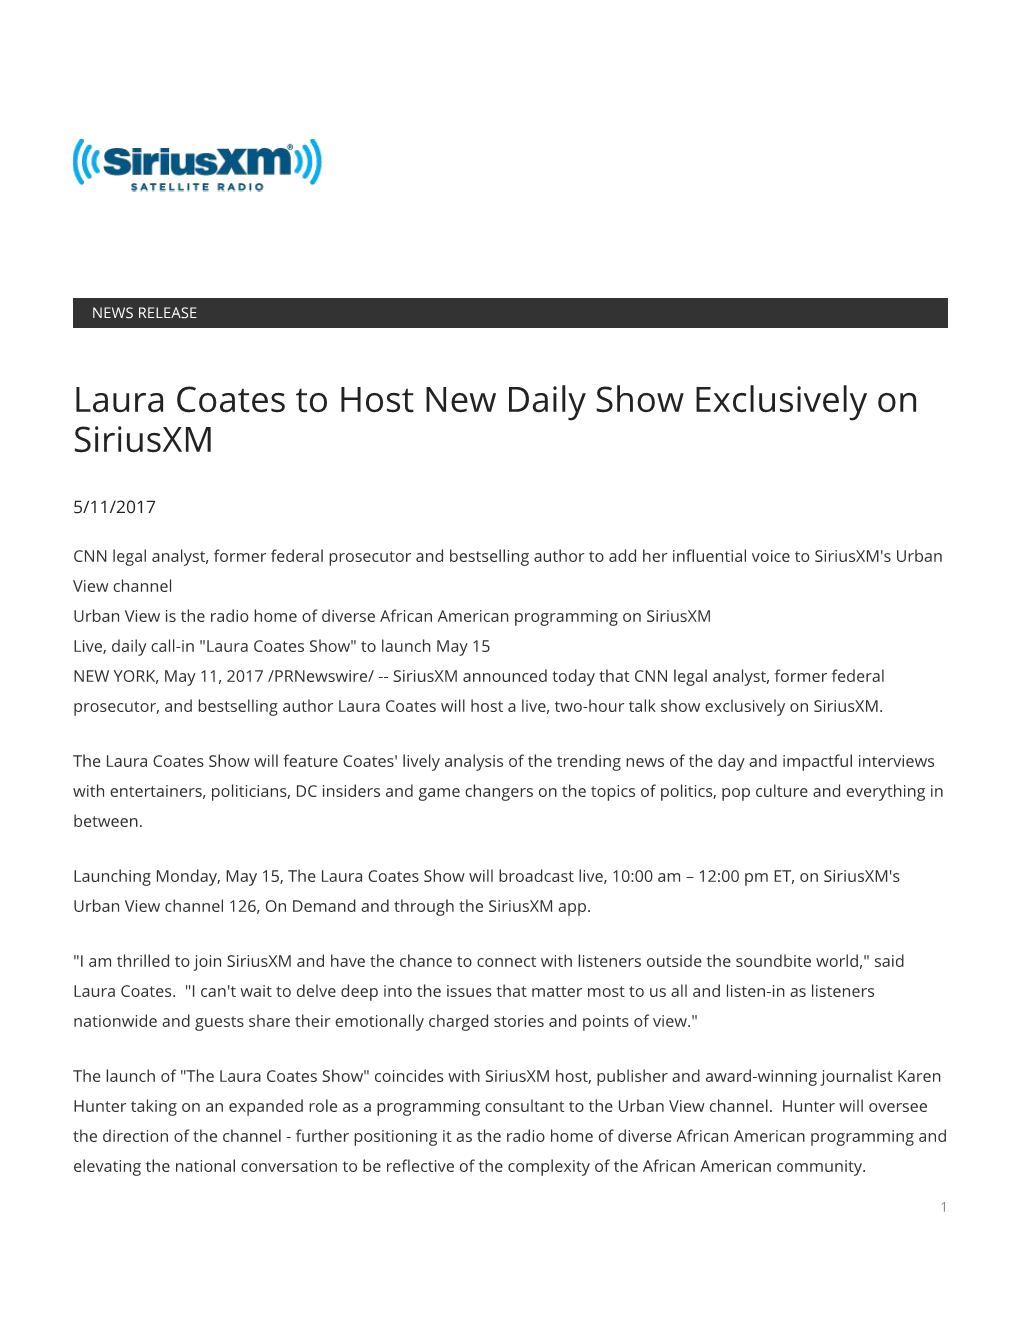 Laura Coates to Host New Daily Show Exclusively on Siriusxm